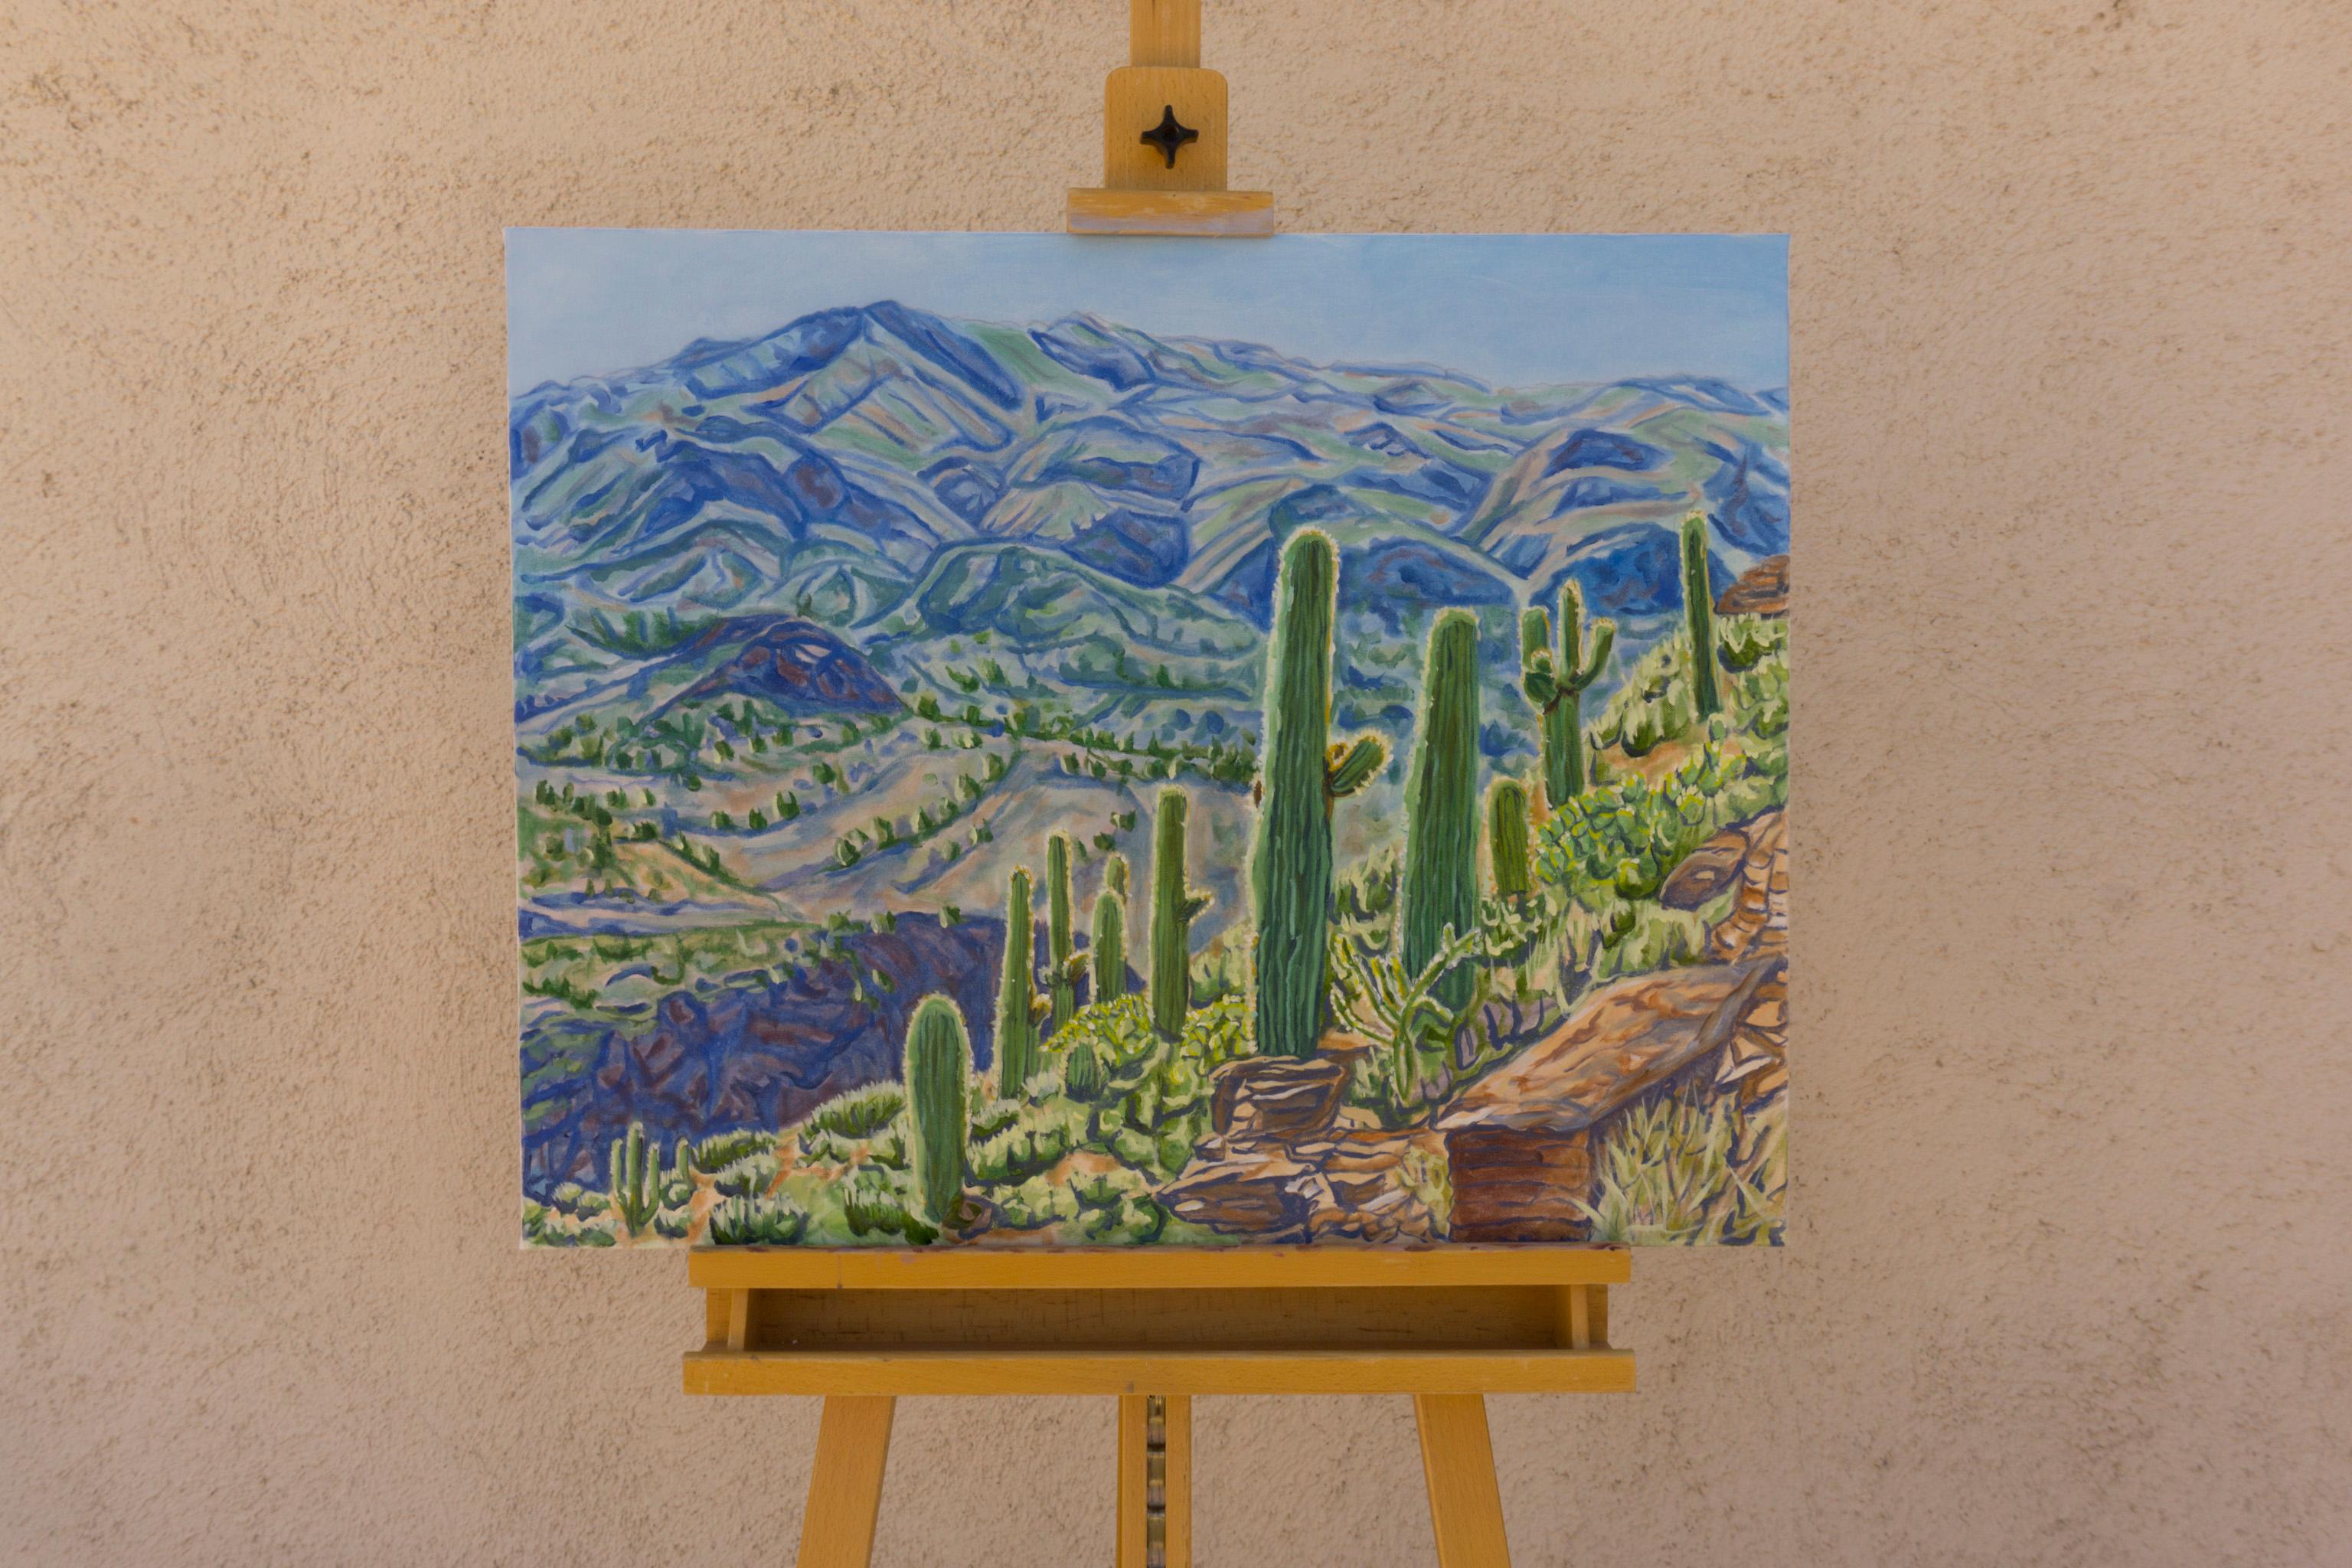 <p>Artist Comments<br>Drawing inspiration from her hiking trips, artist Crystal DiPietro paints scenes she personally witnesses. She depicts a hillside view of Saguaro cacti overlooking the canyon. 